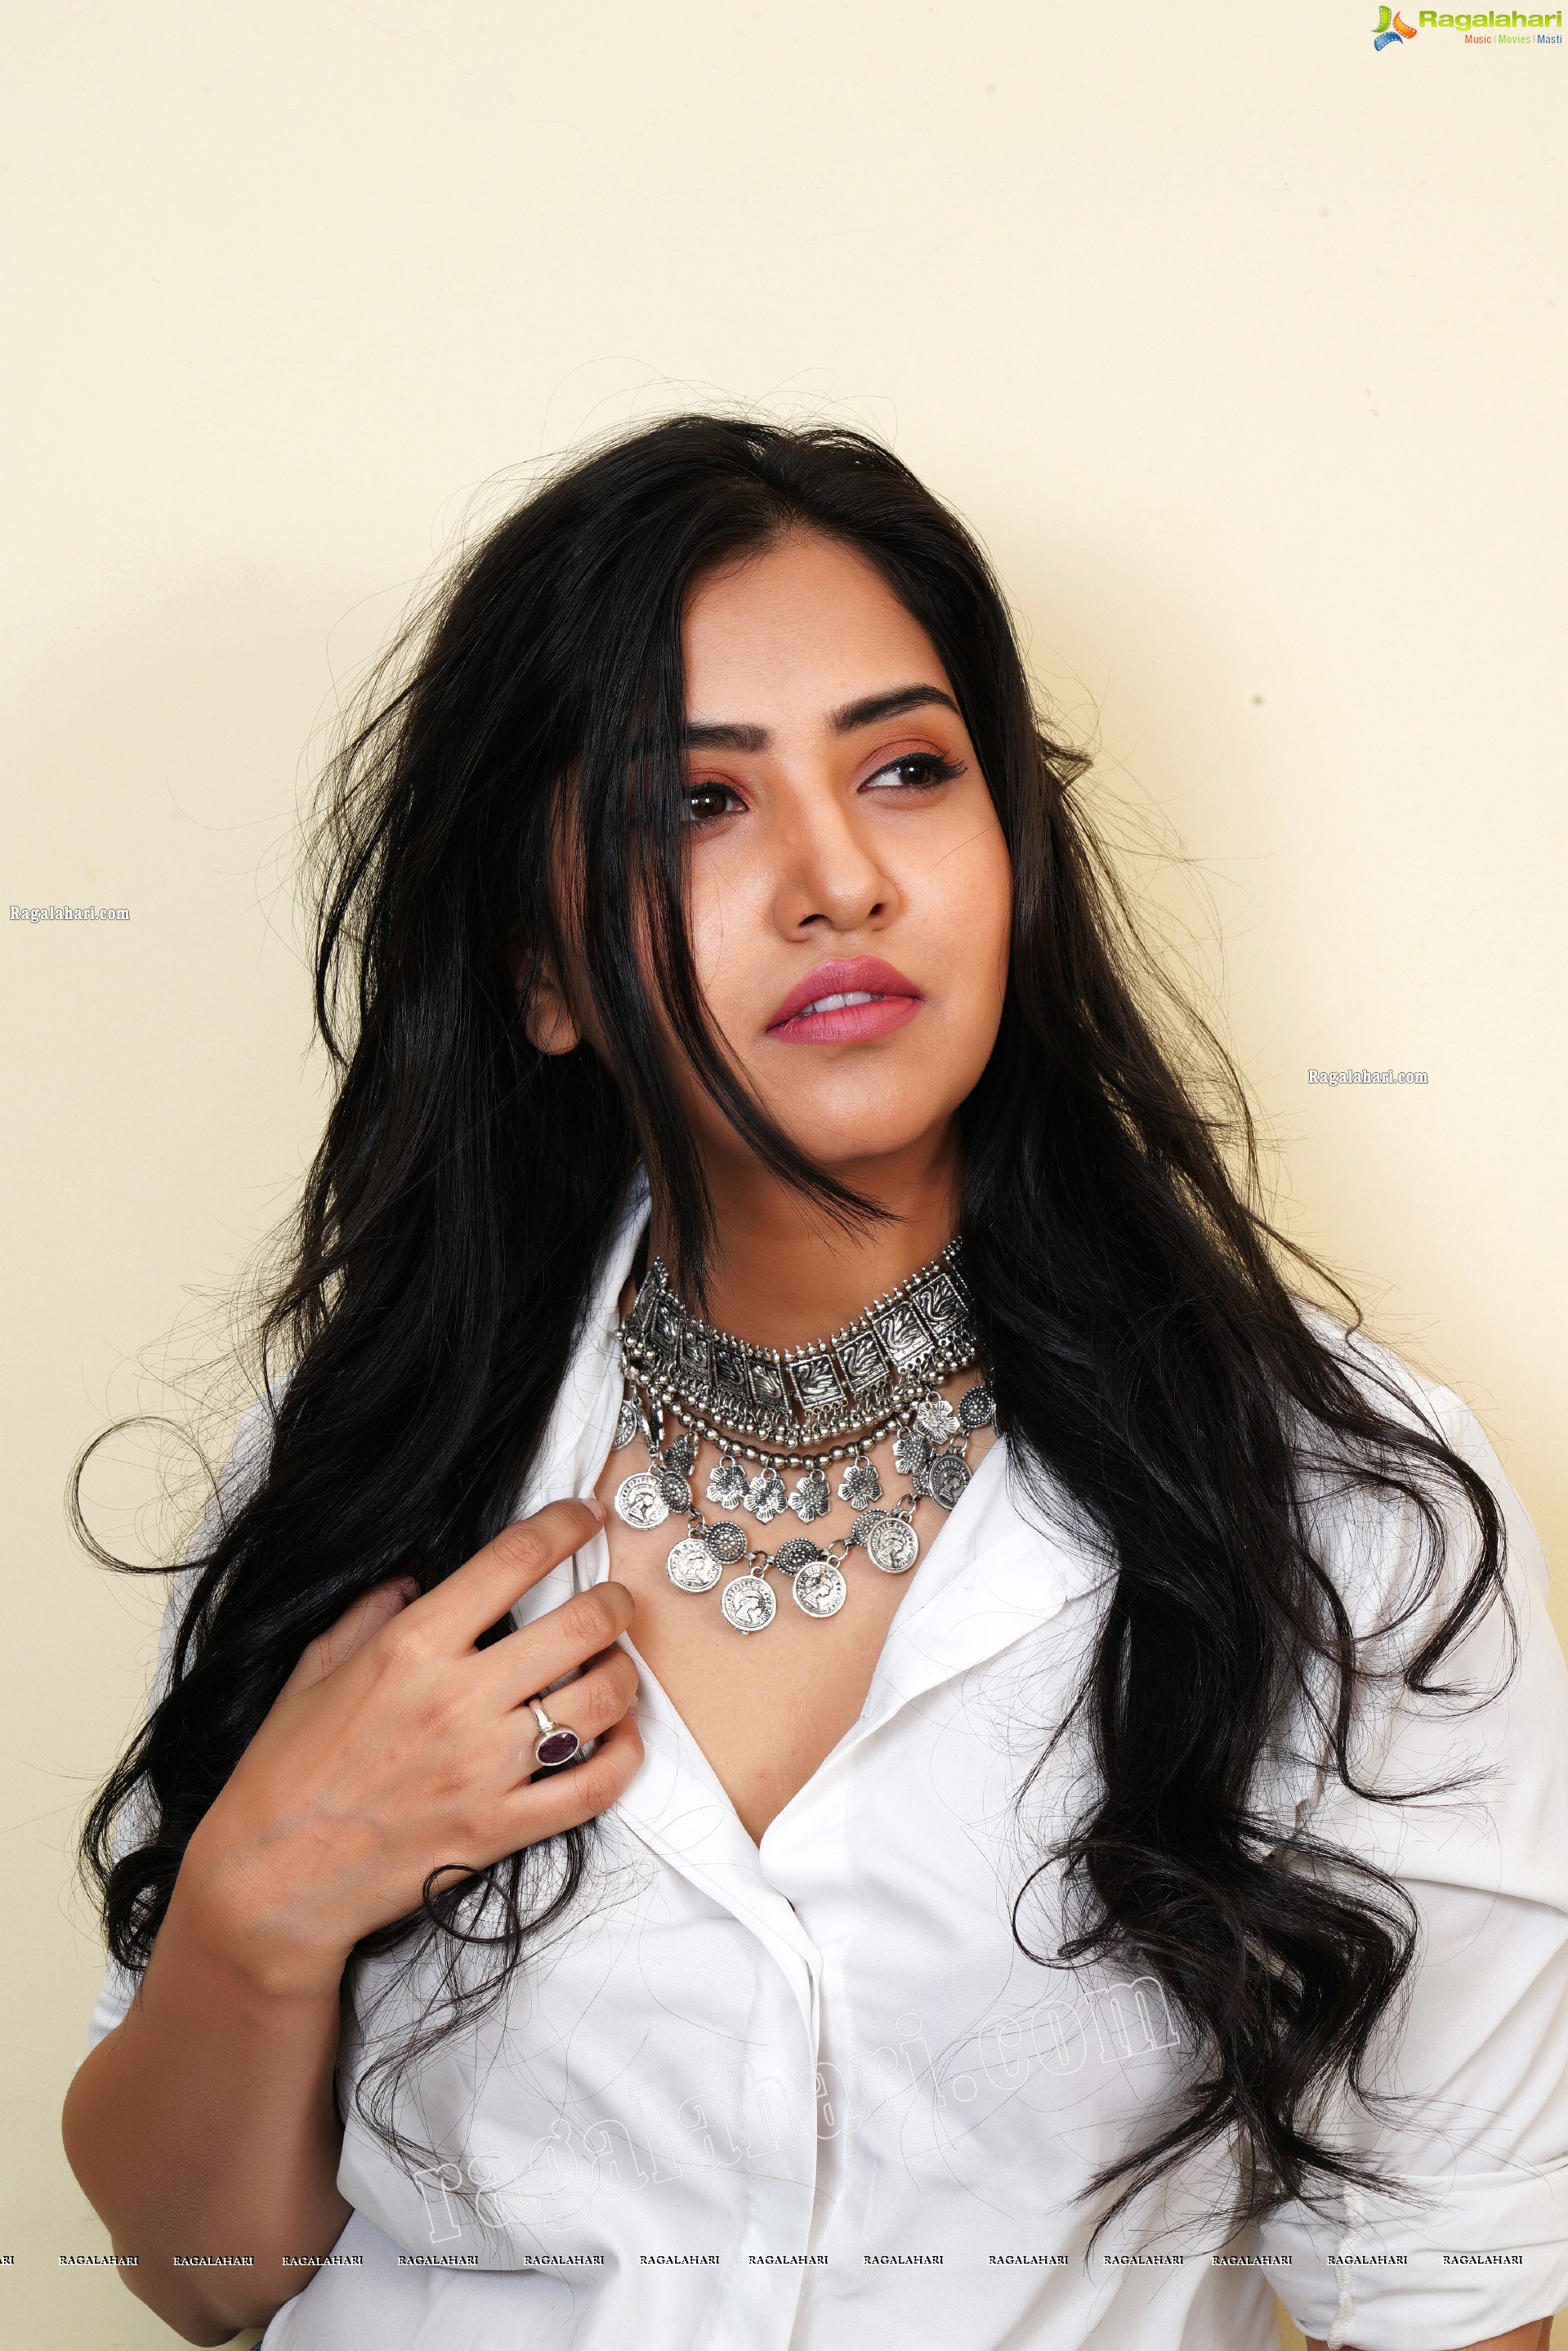 Palak Gangele in White Shirt and Jeans, Exclusive Photoshoot